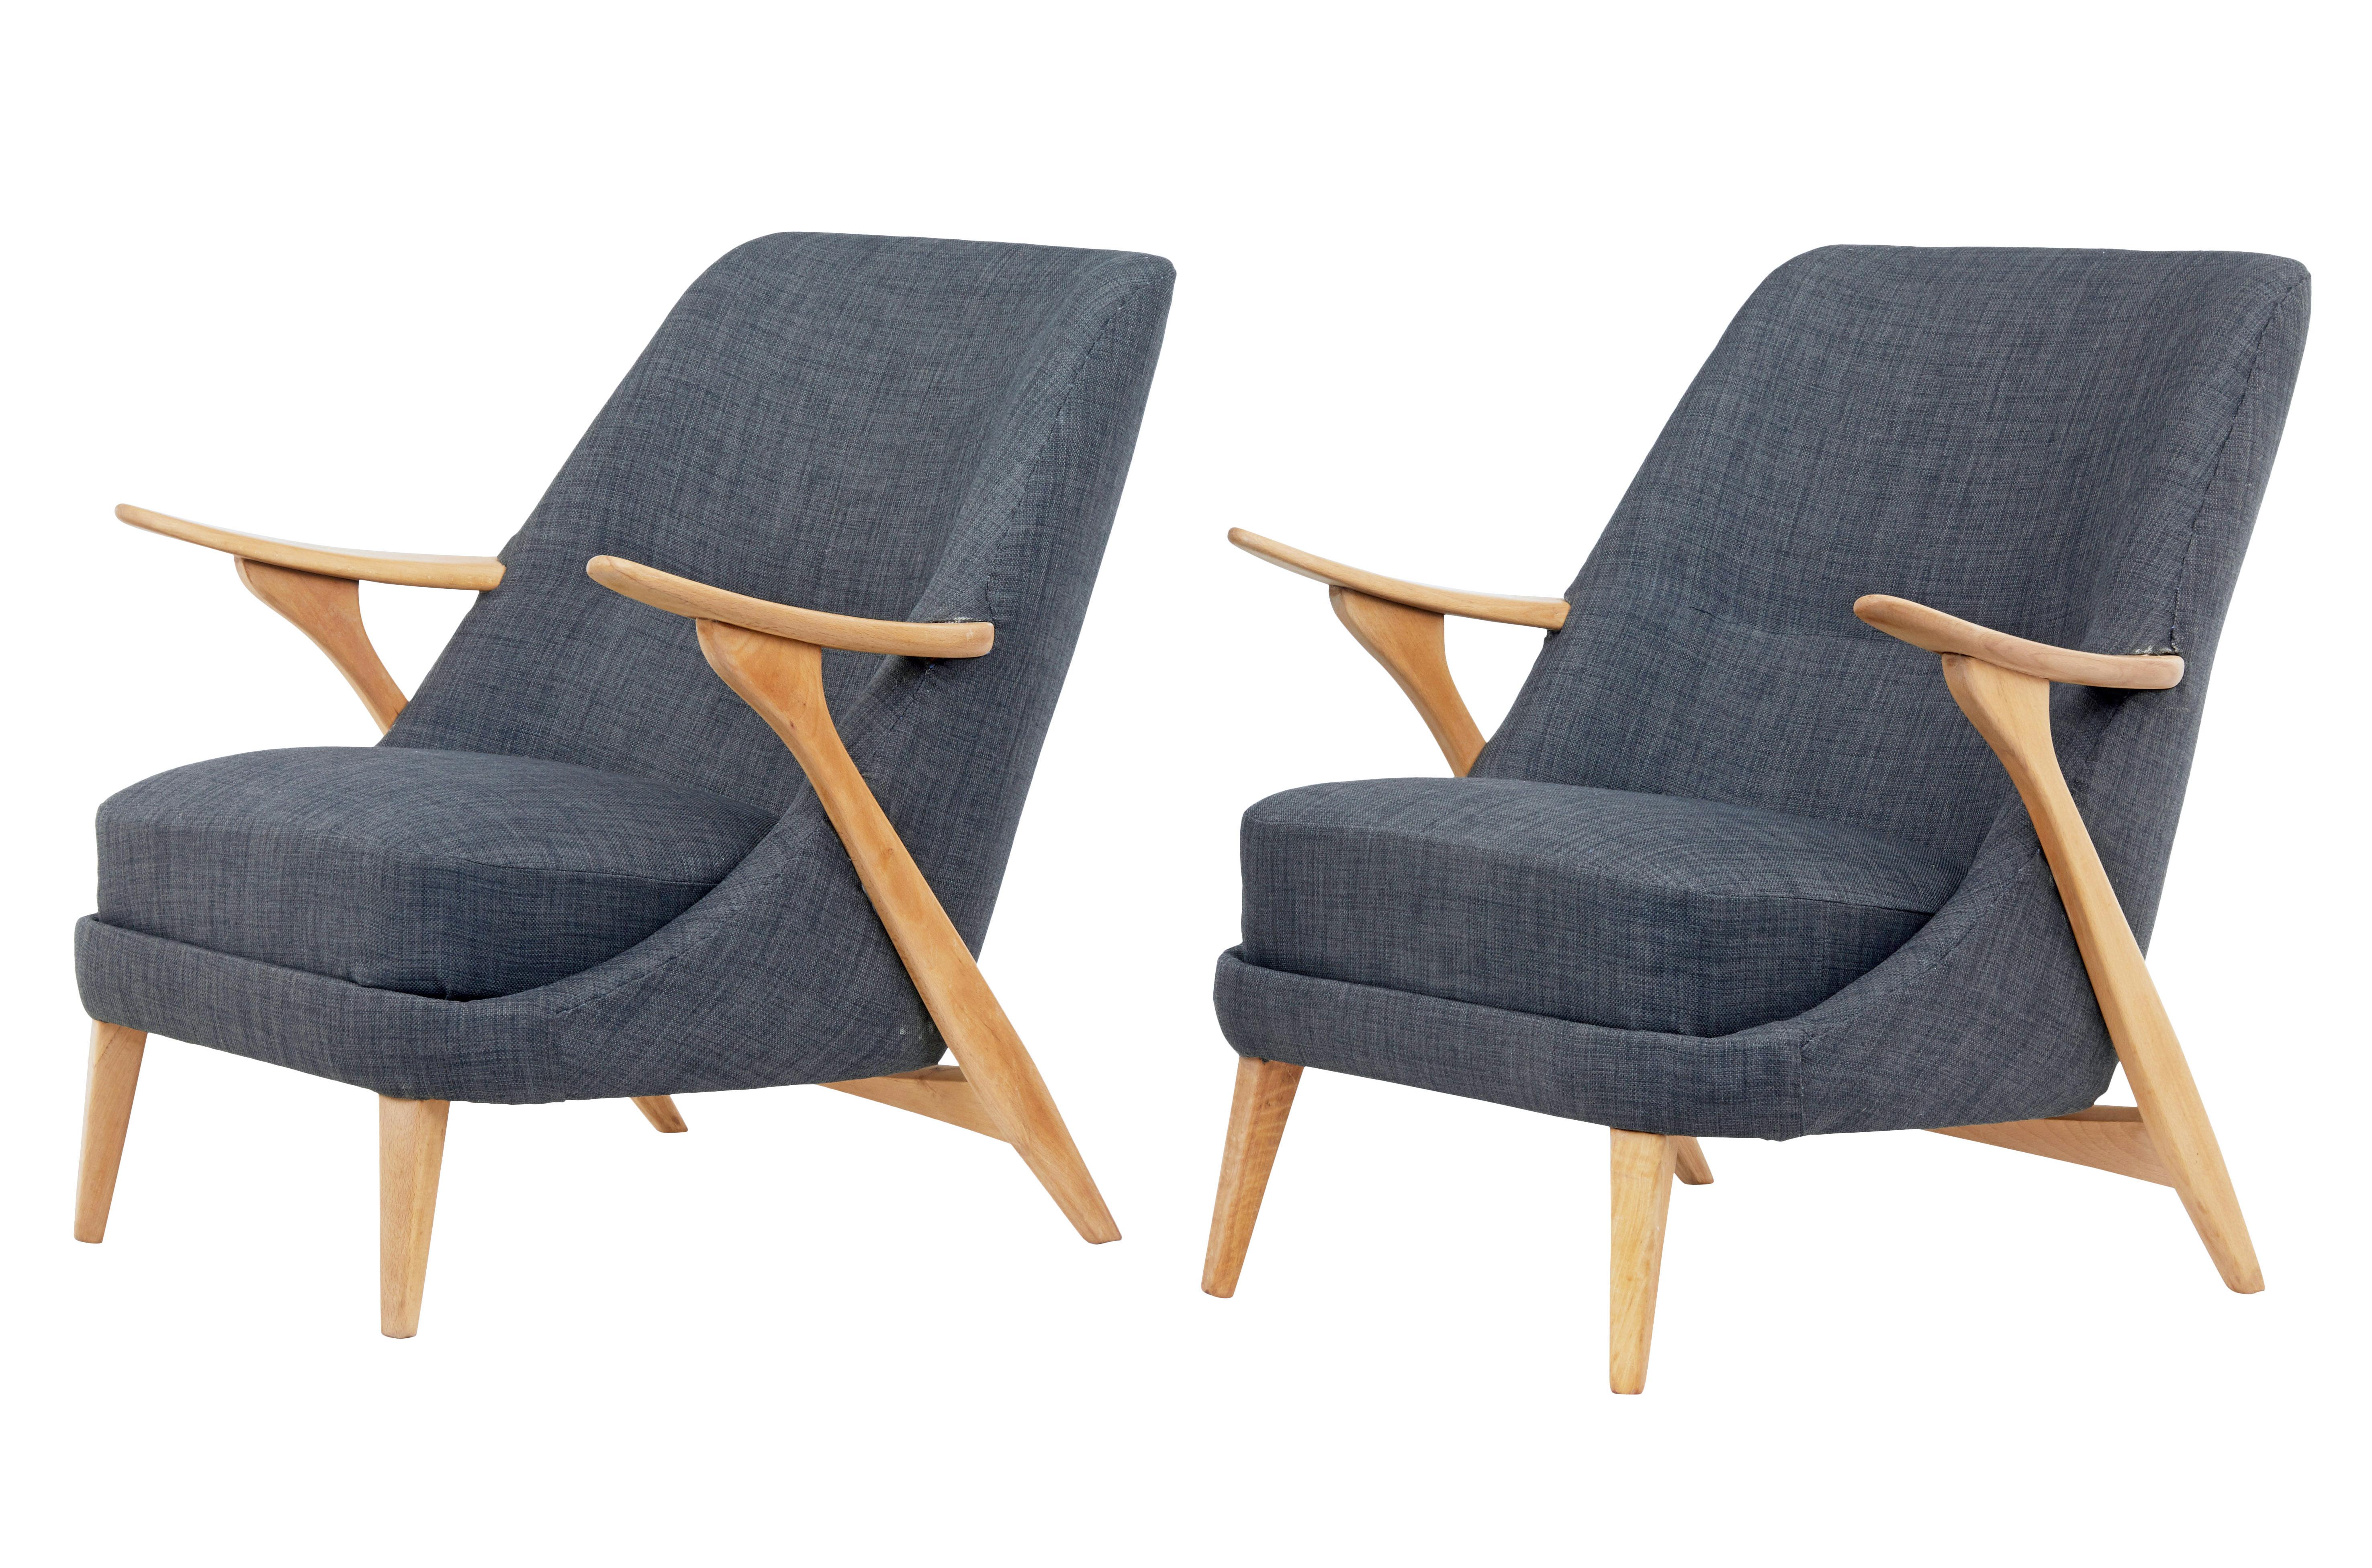 Fine quality pair of beech armchairs designed by Svante Skogh for Seffle Mobelfabrik, circa 1950.

Skogh worked for a number of furniture producers during the 1950s and 1960s, known for his flowing lines these chairs were designed for Seffle